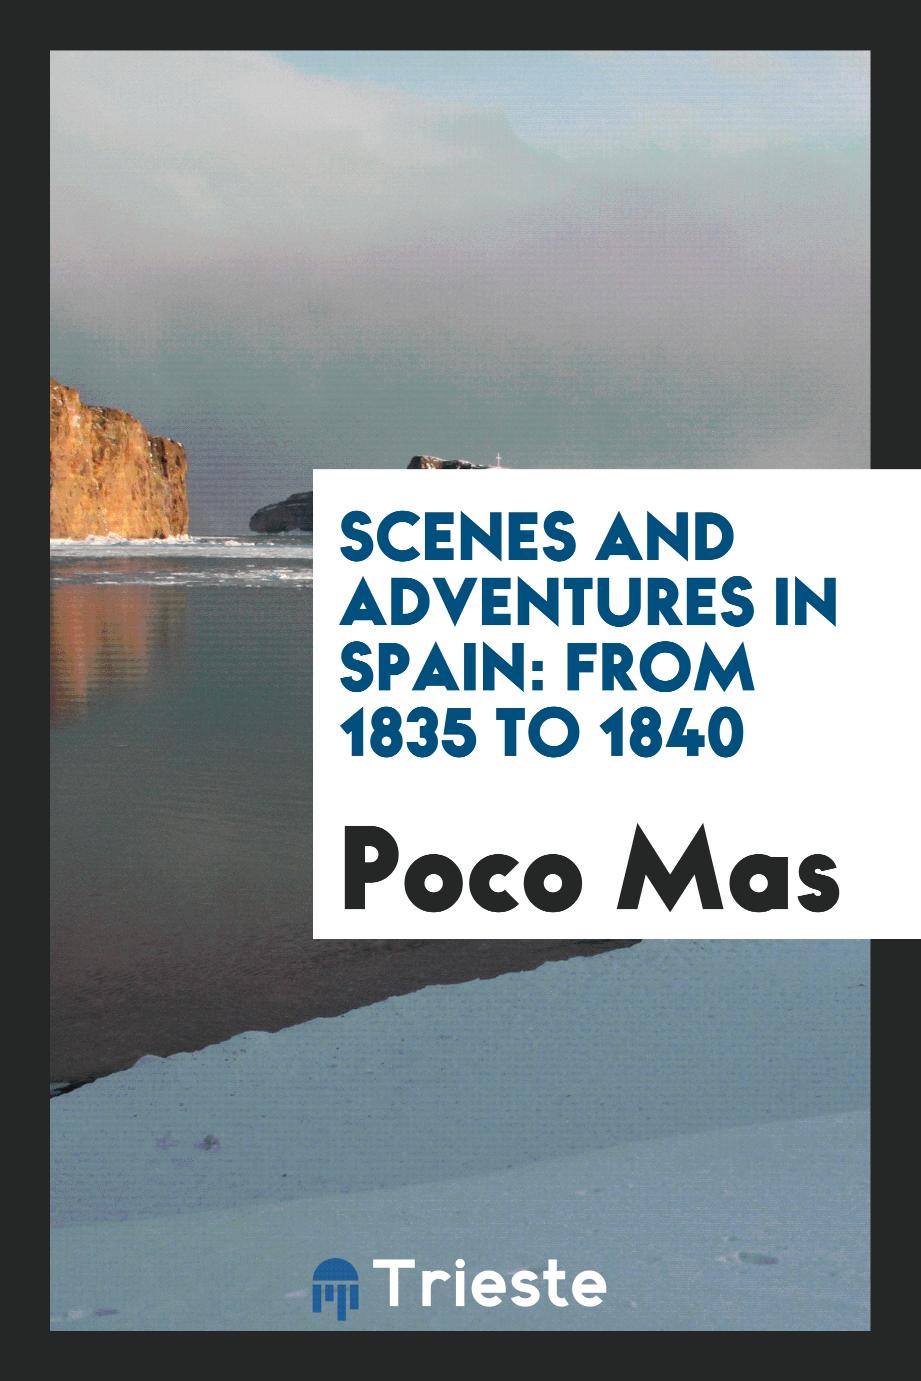 Scenes and Adventures in Spain: From 1835 to 1840